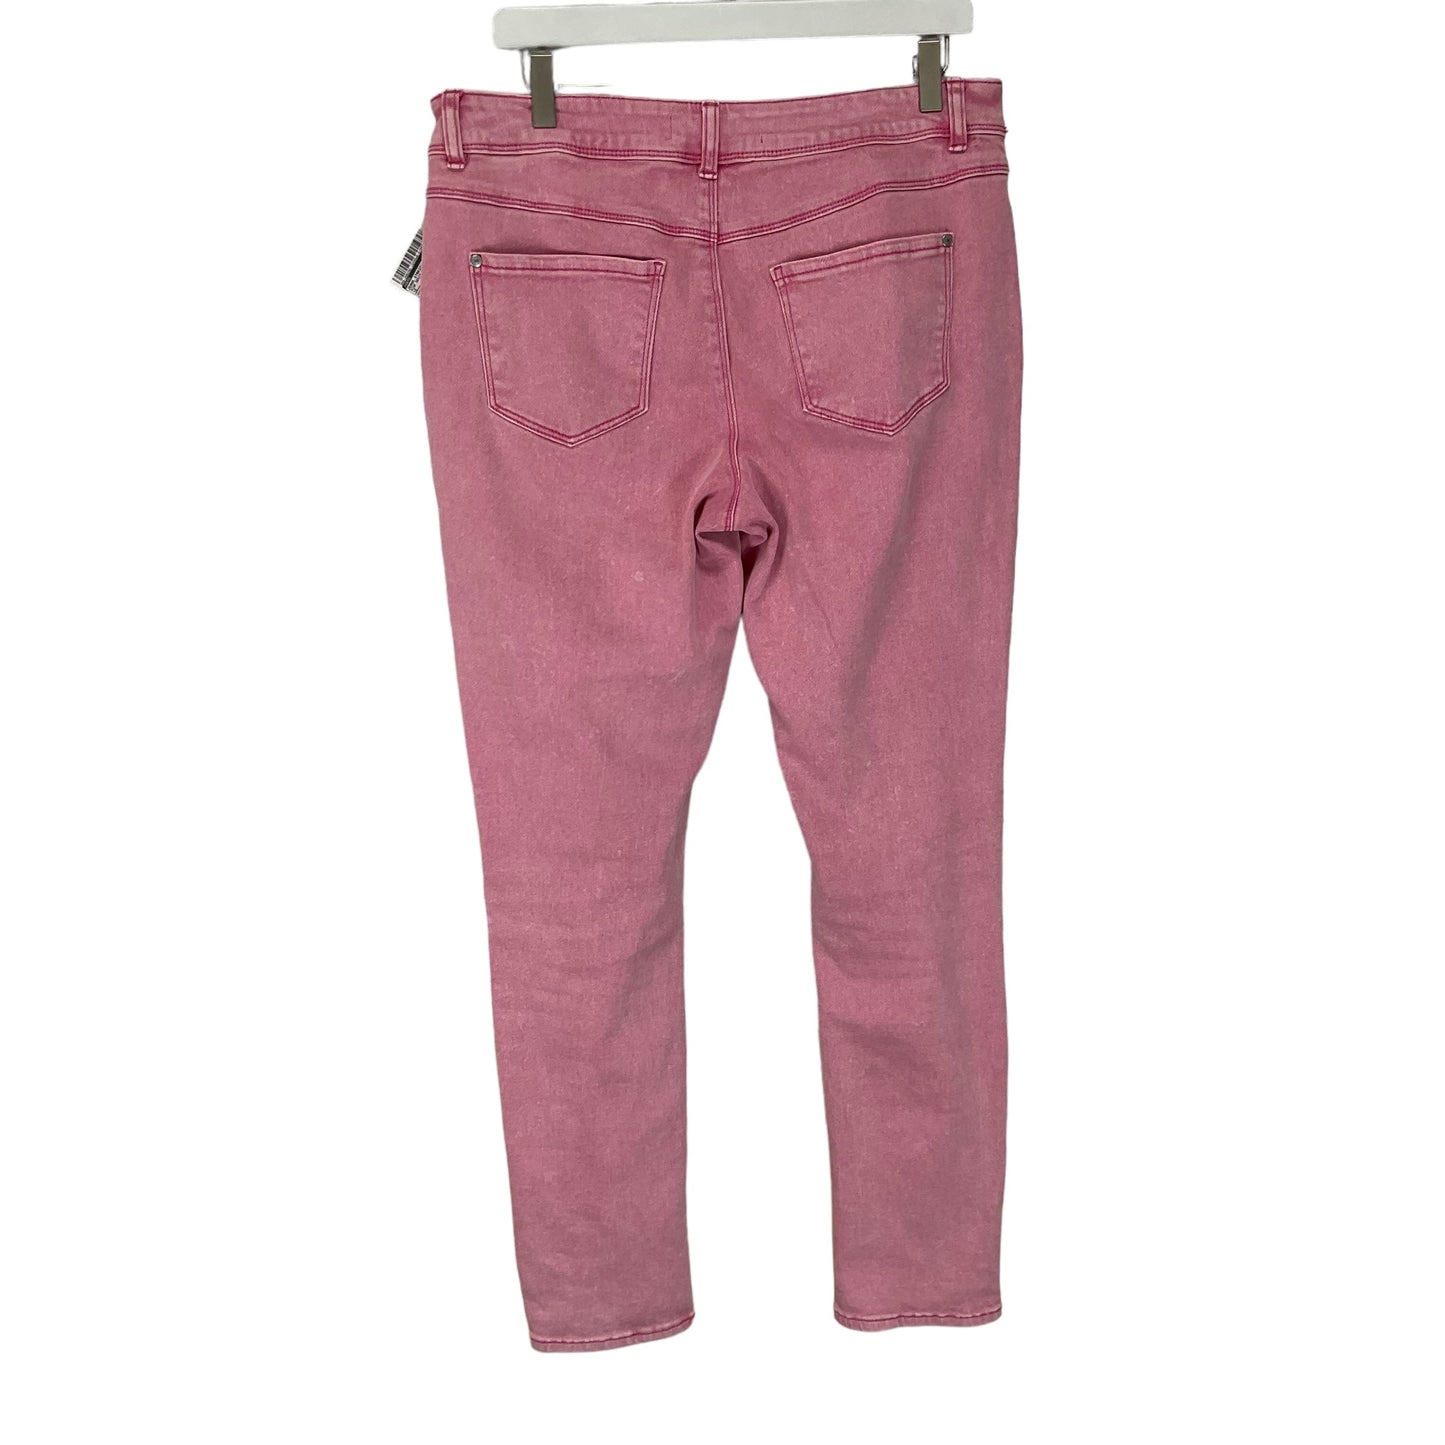 Pink Denim Jeans Straight Cato, Size 10